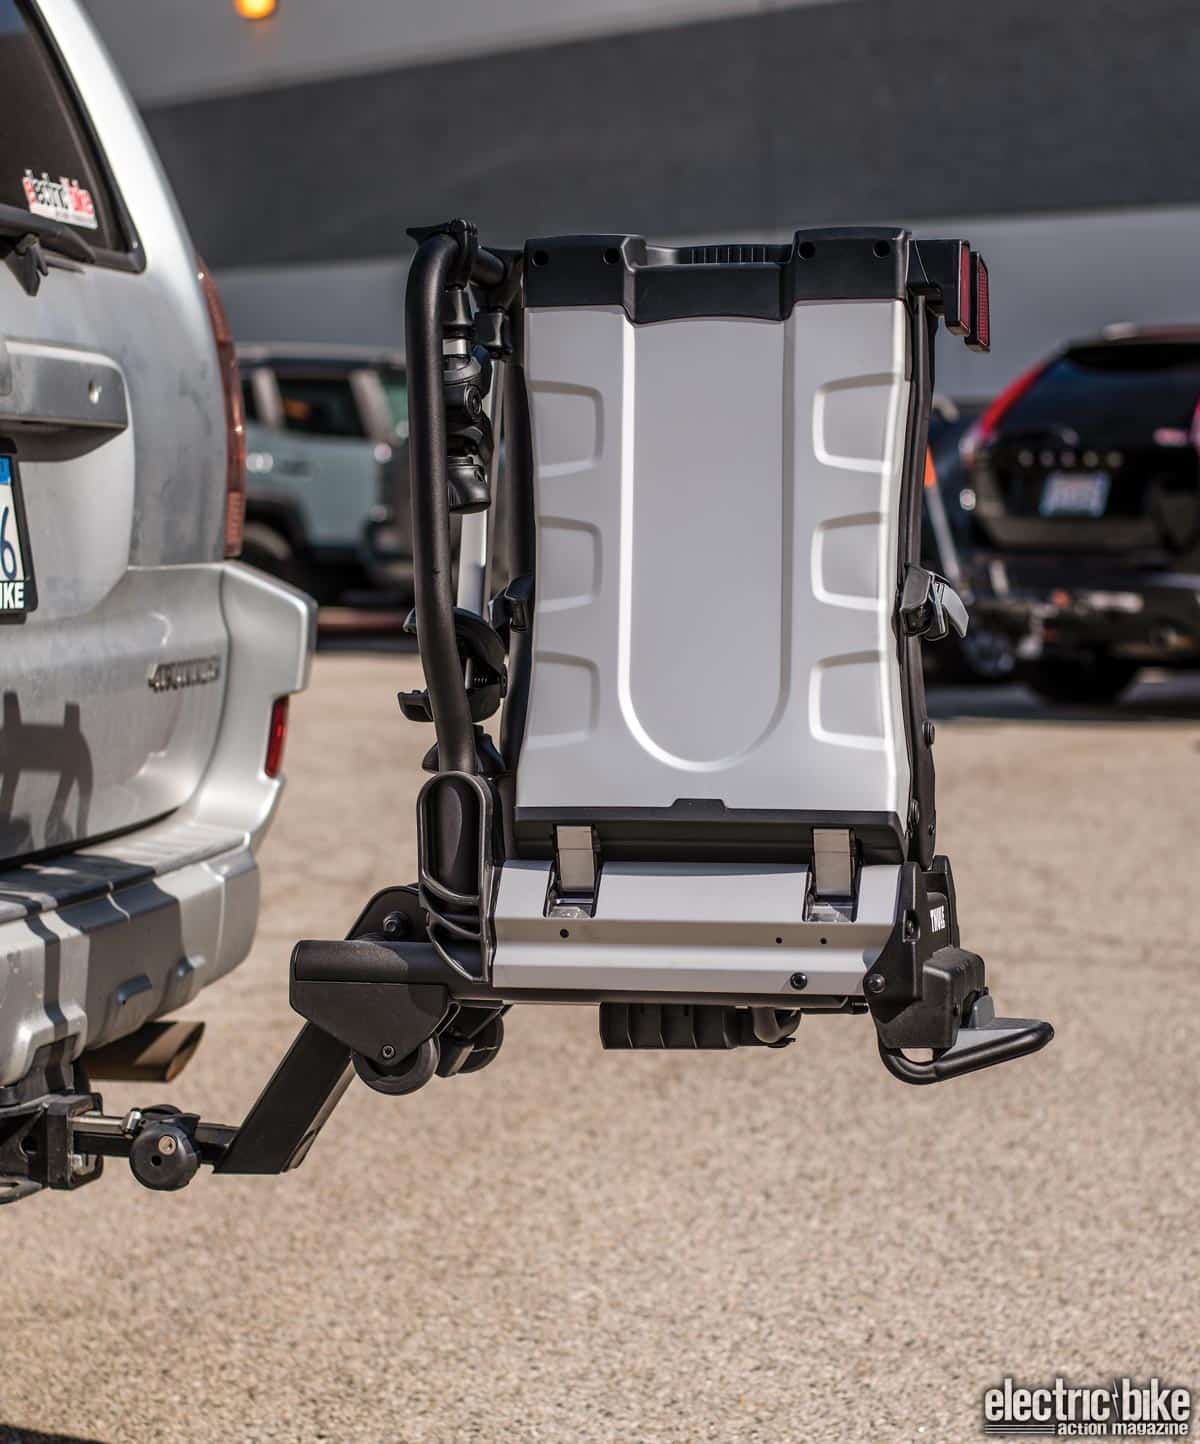 Product Review: Thule EasyFold XT 2 Bike Rack - Electric Bike Action